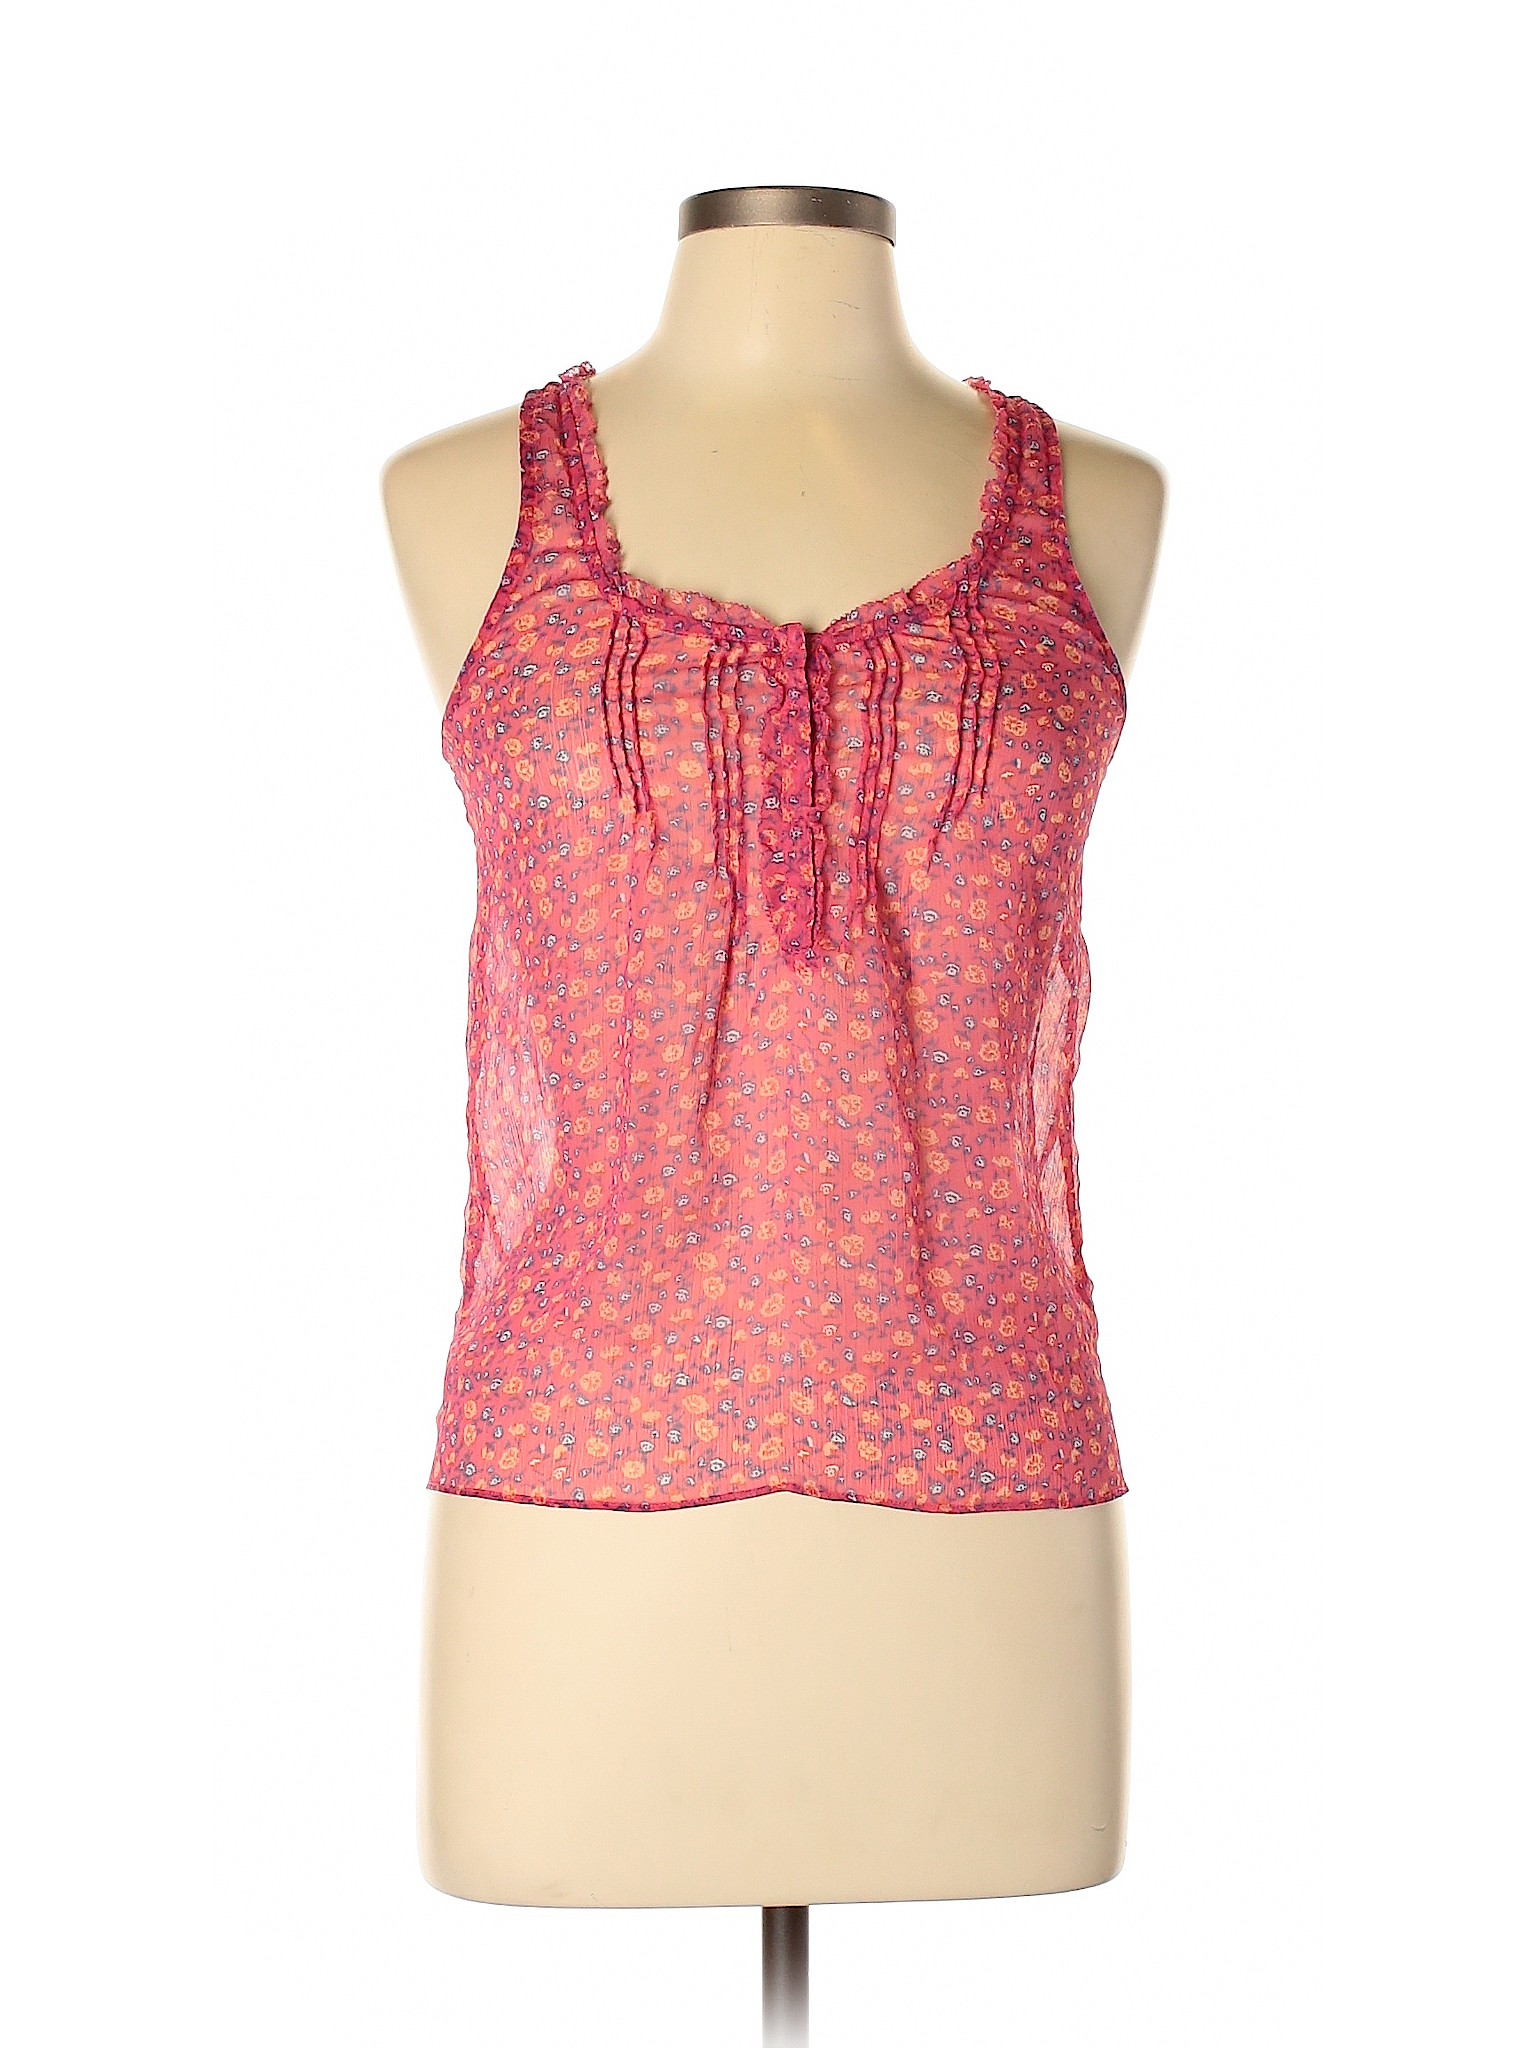 American Eagle Outfitters Women Pink Sleeveless Blouse 0 | eBay